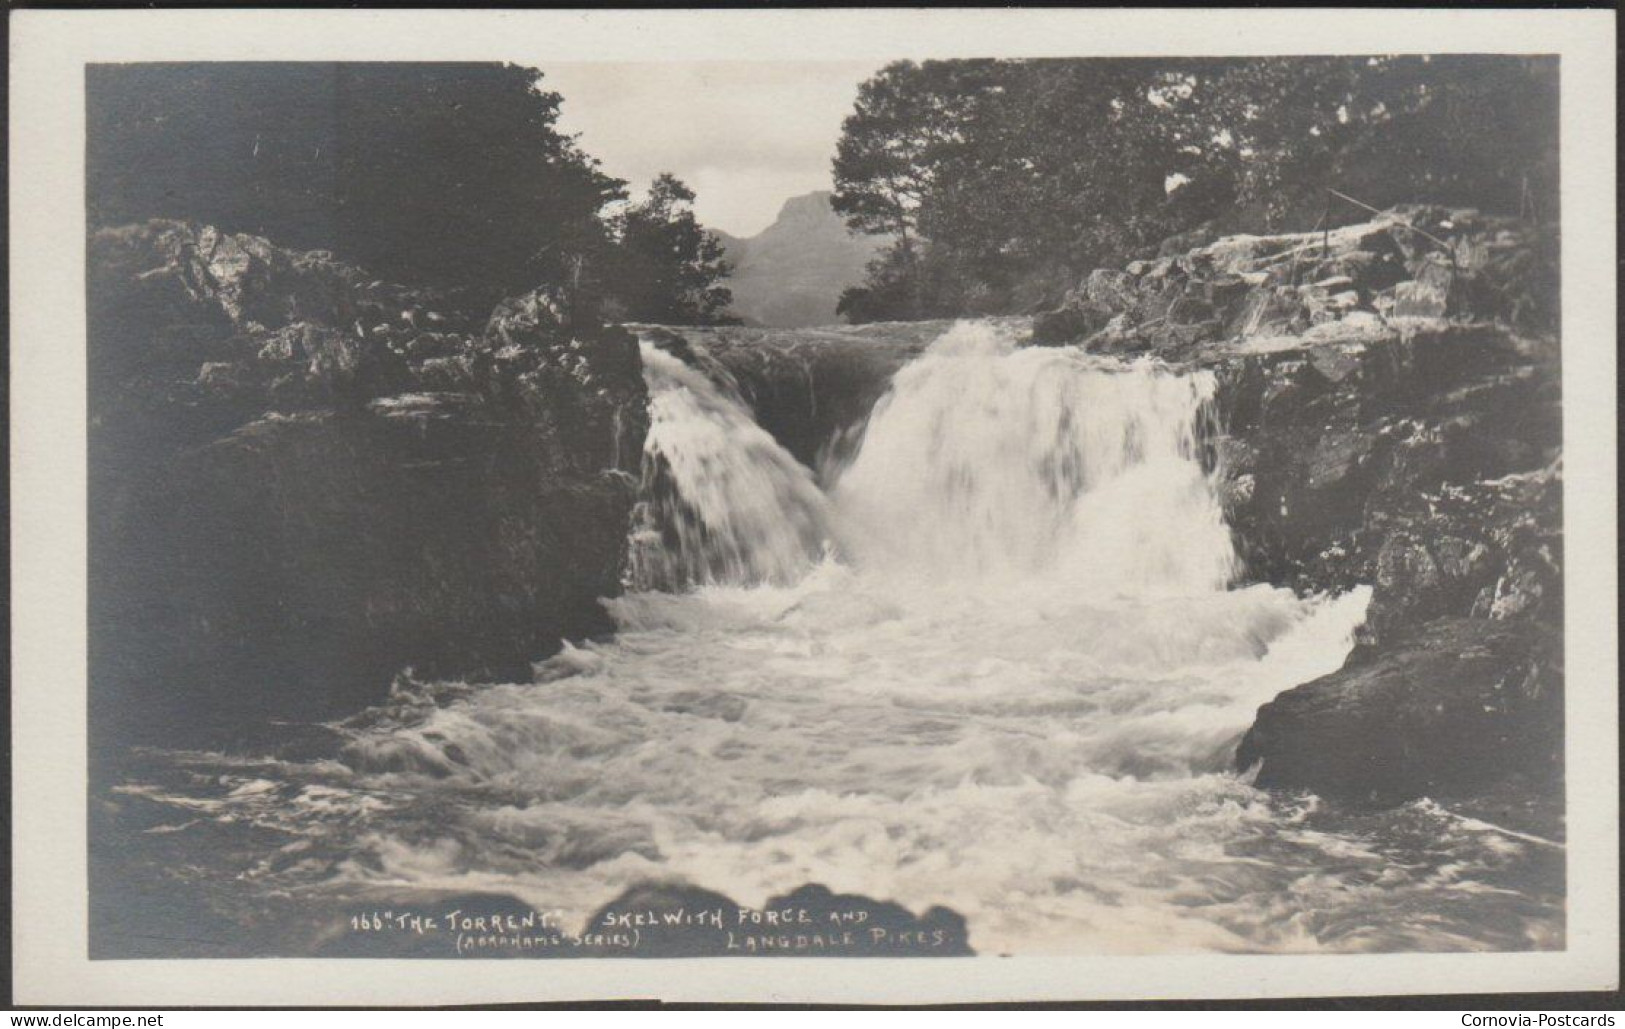 The Torrent, Skelwith Force & Langdale Pikes, Westmorland, C.1930s - Abraham RP Postcard - Ambleside